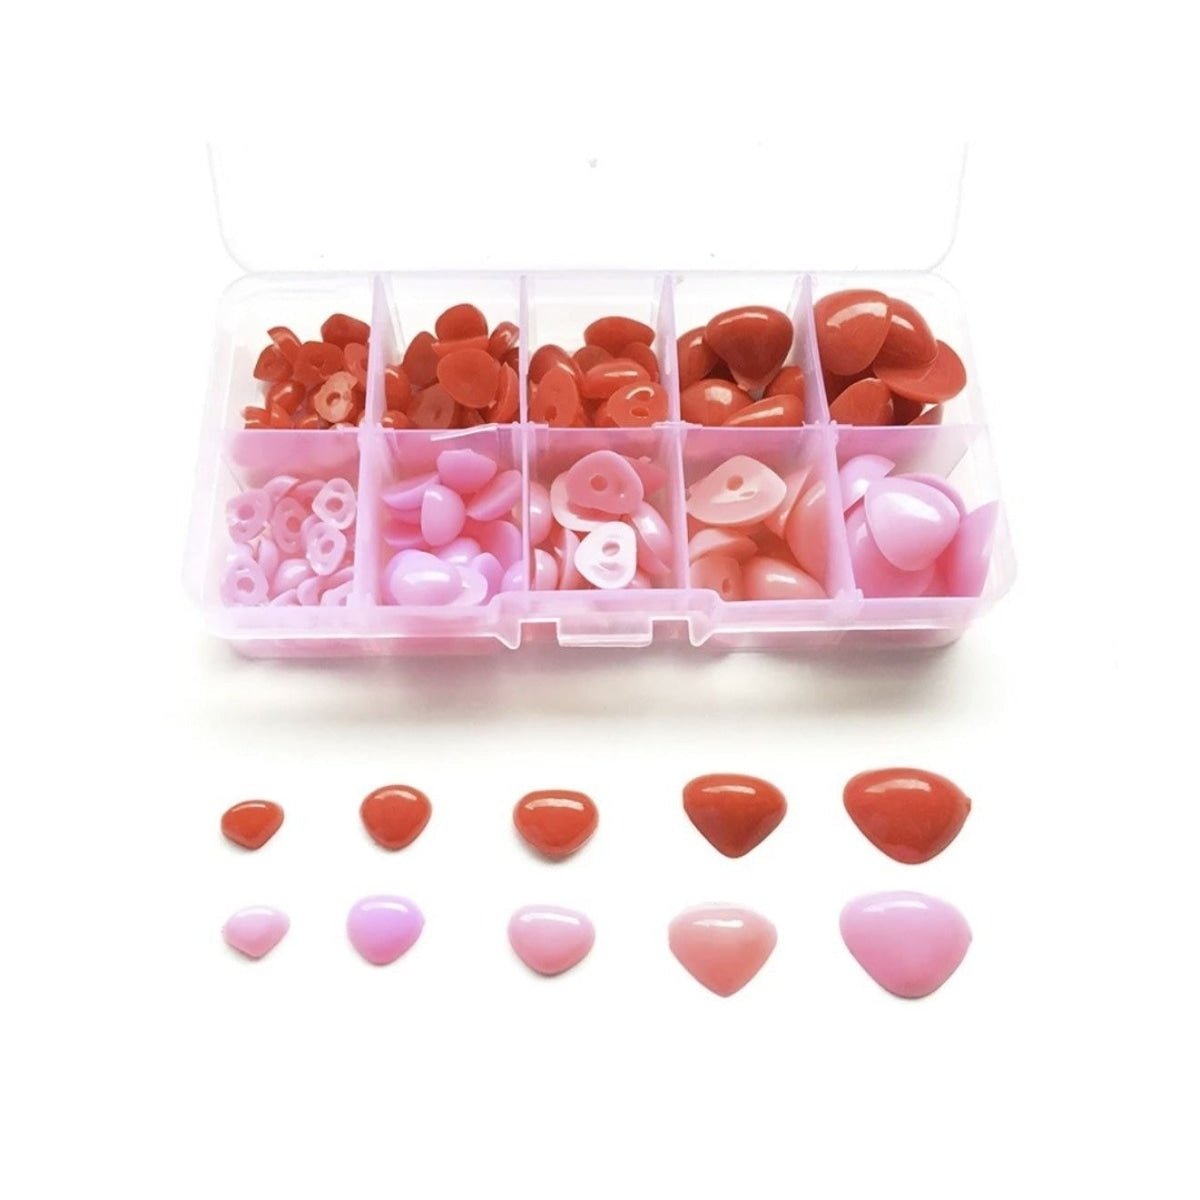 150pcs Set Plastic Toy Noses Triangle Nose Black Brown Pink Bear Puppet Dolls Toy - Red and Pink - - Asia Sell